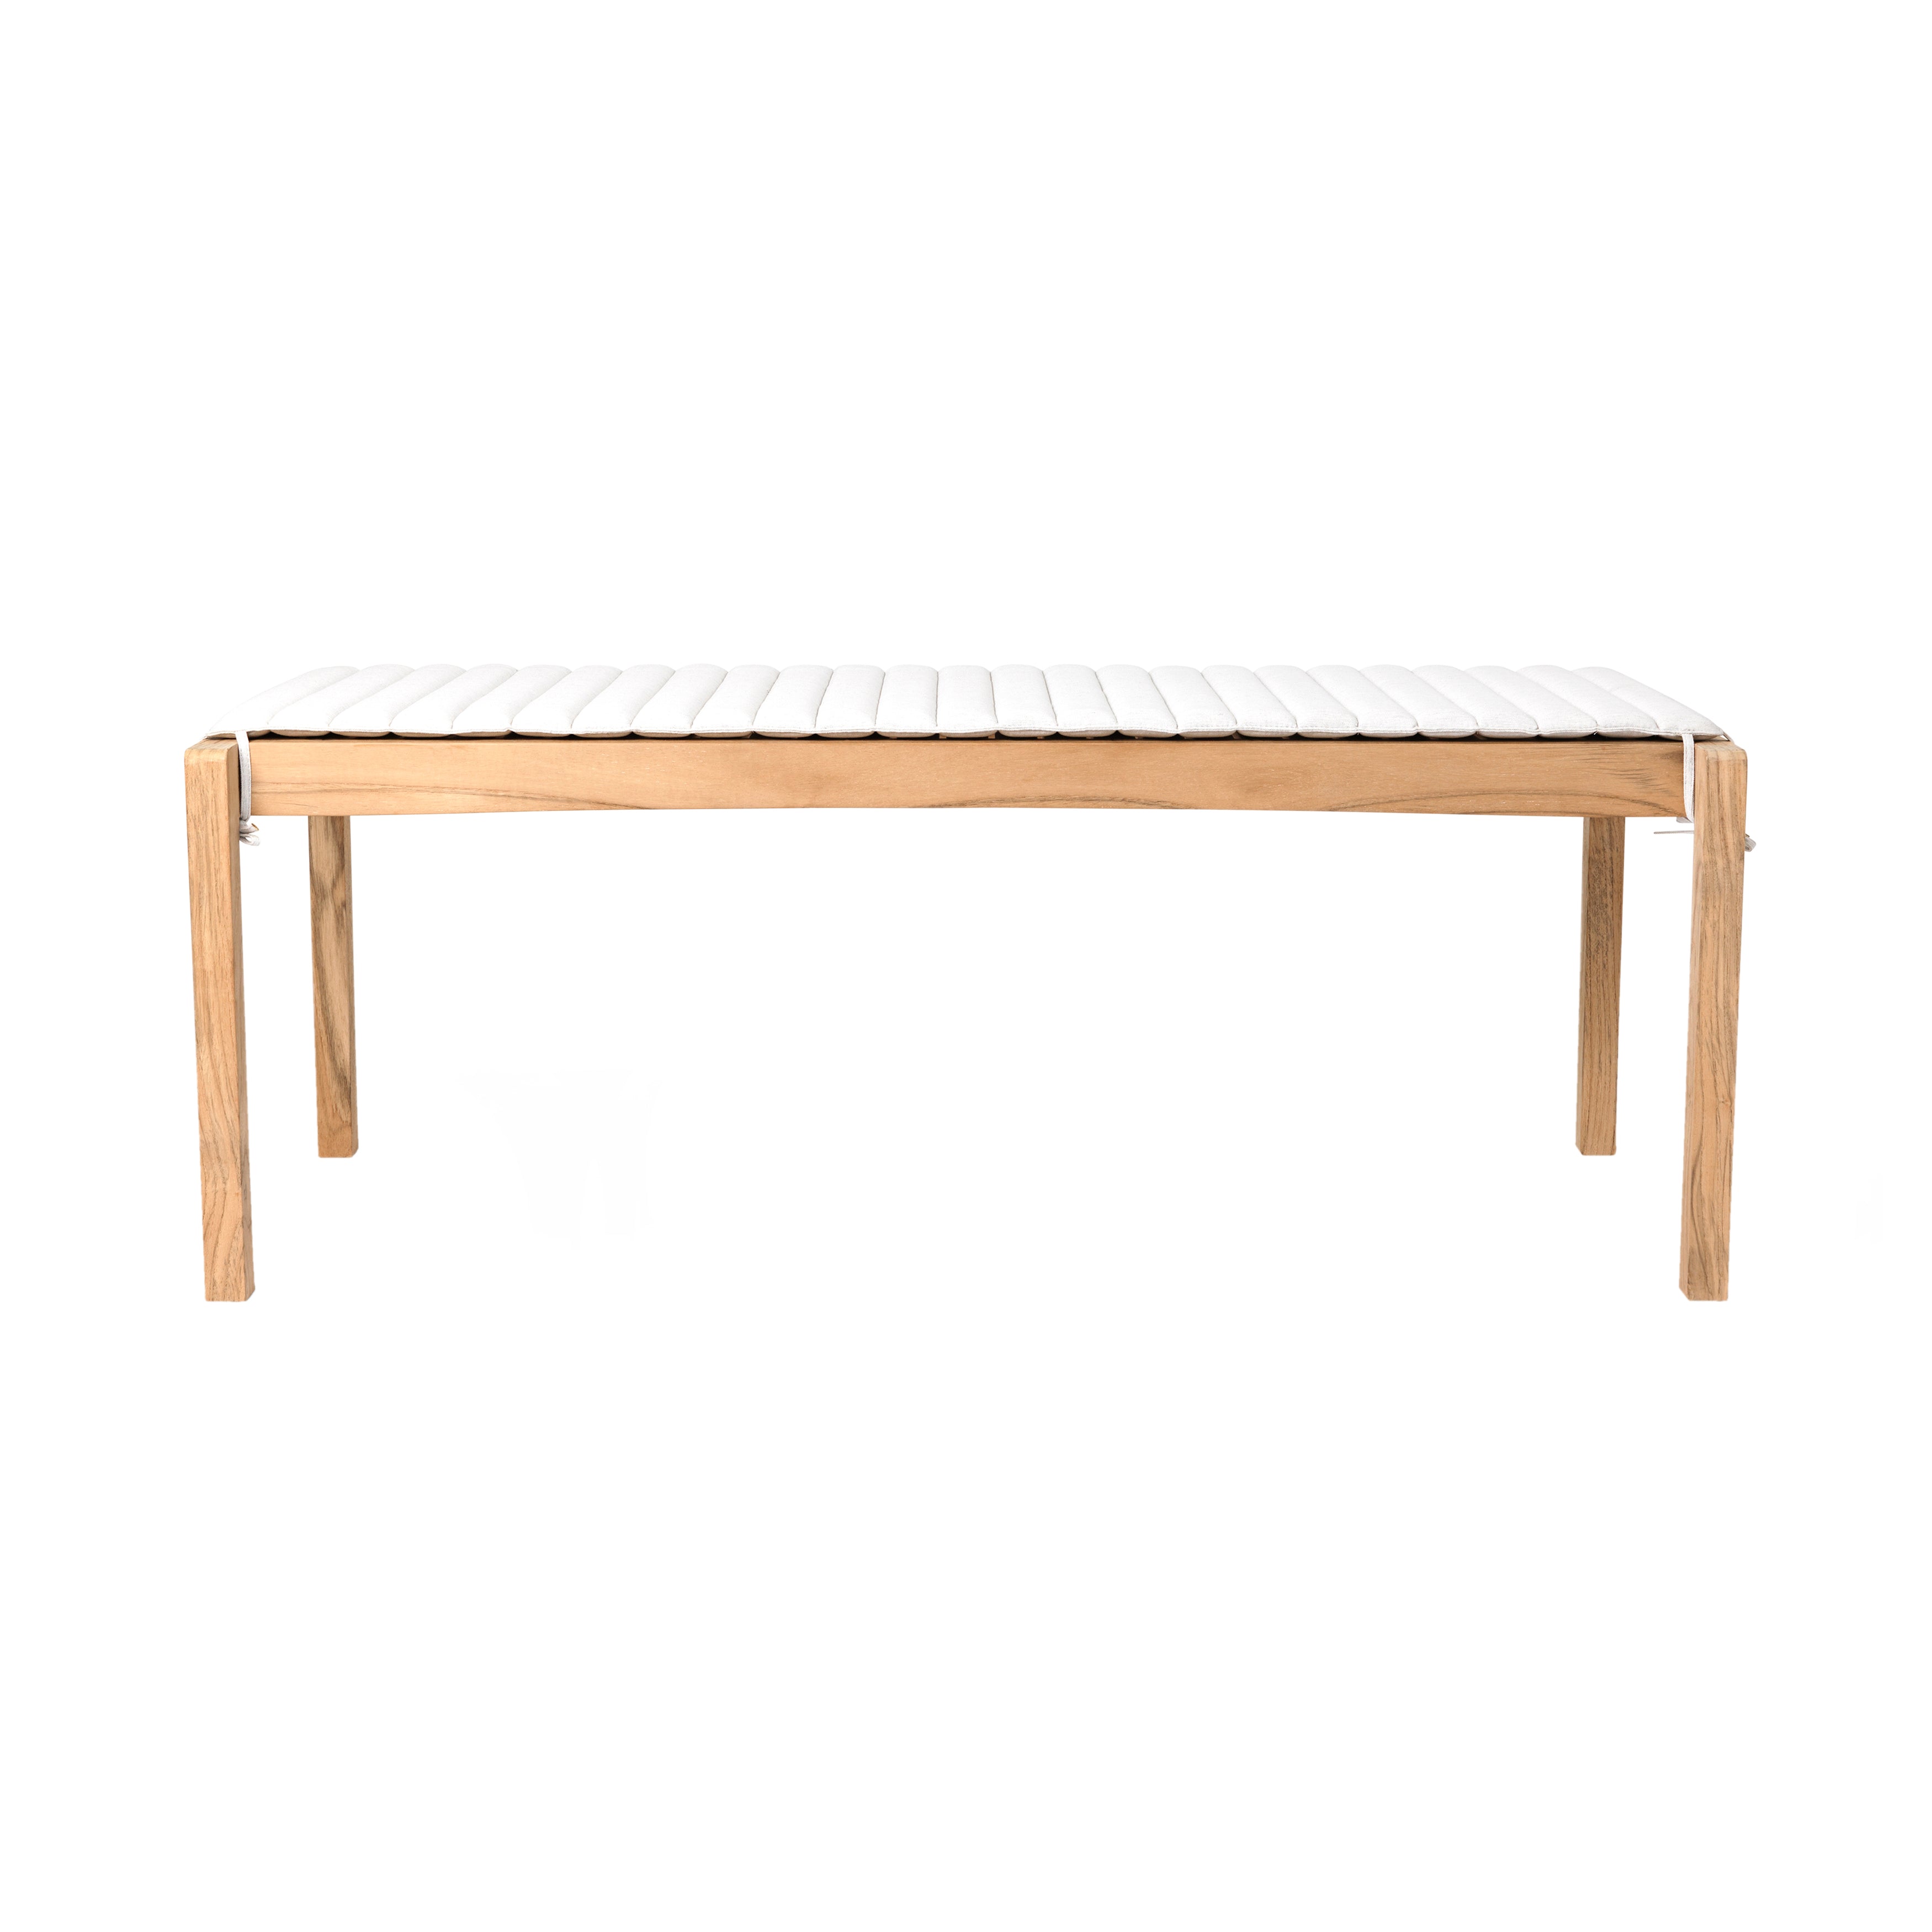 AH912 Outdoor Table Bench: With Cushion